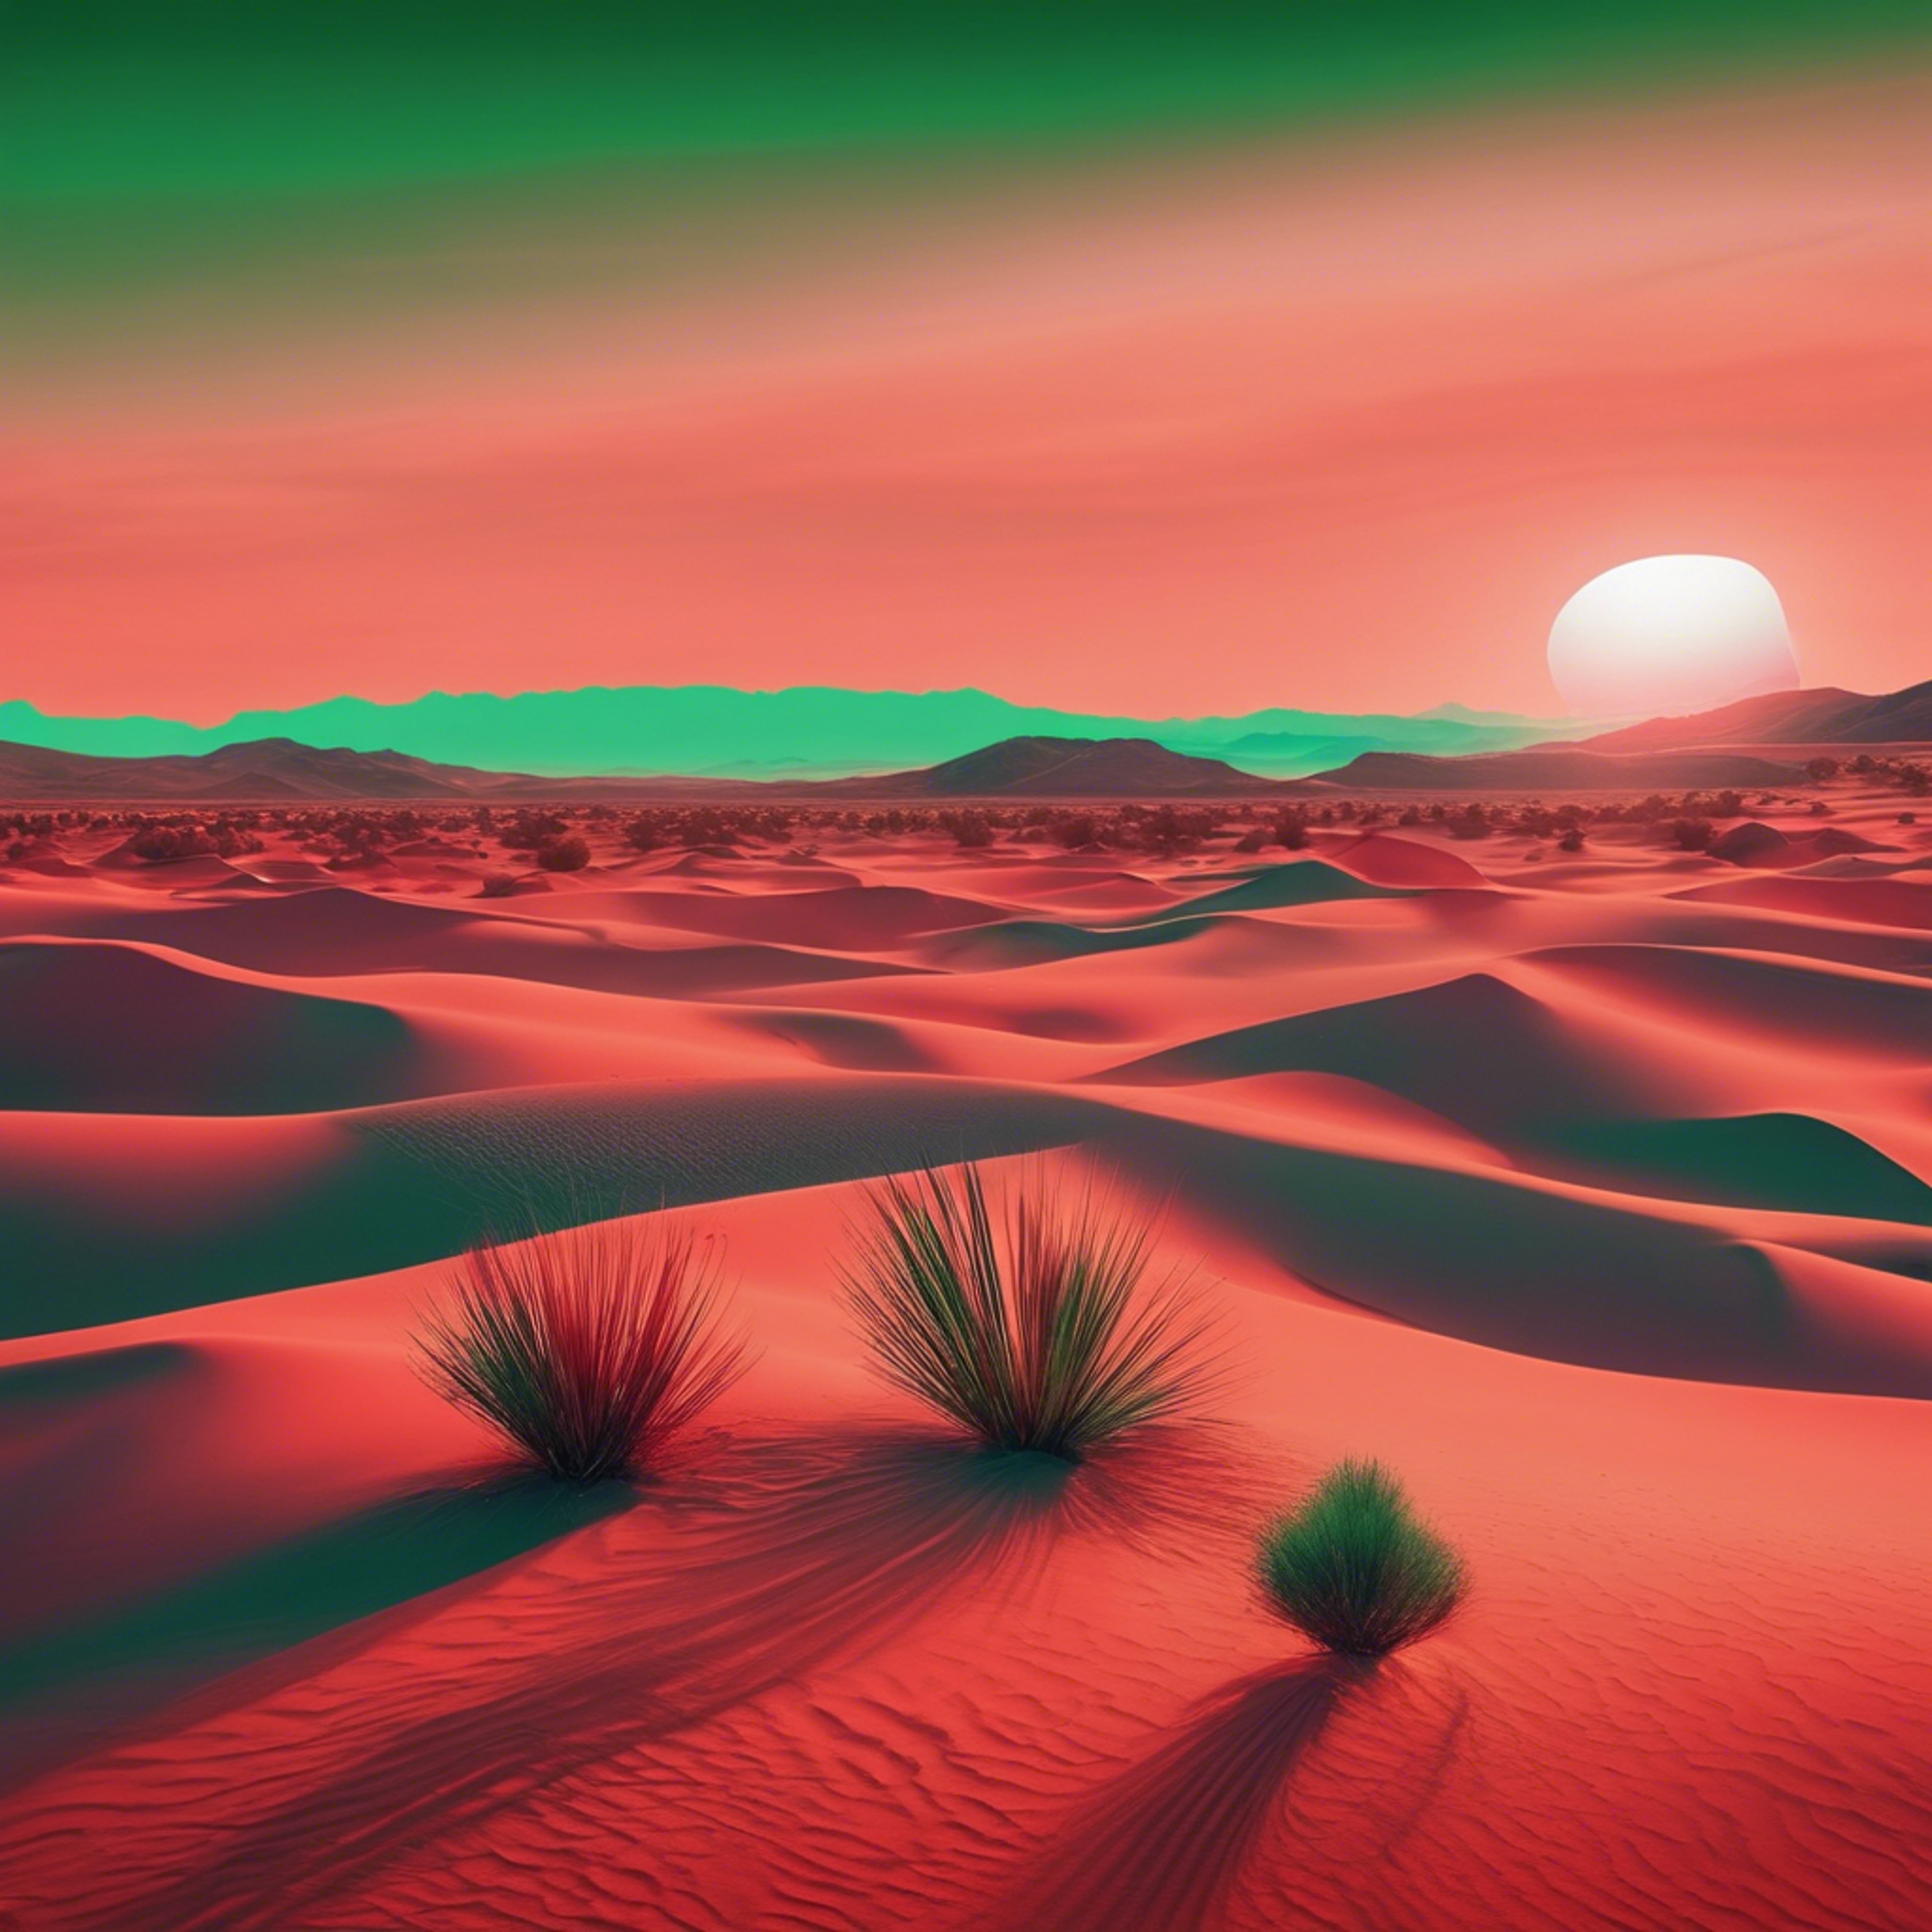 Abstract mirage in red and green, reminiscent of a modern artist's take on a desert sunset Tapet[3a4ec3a043b54638a7ad]